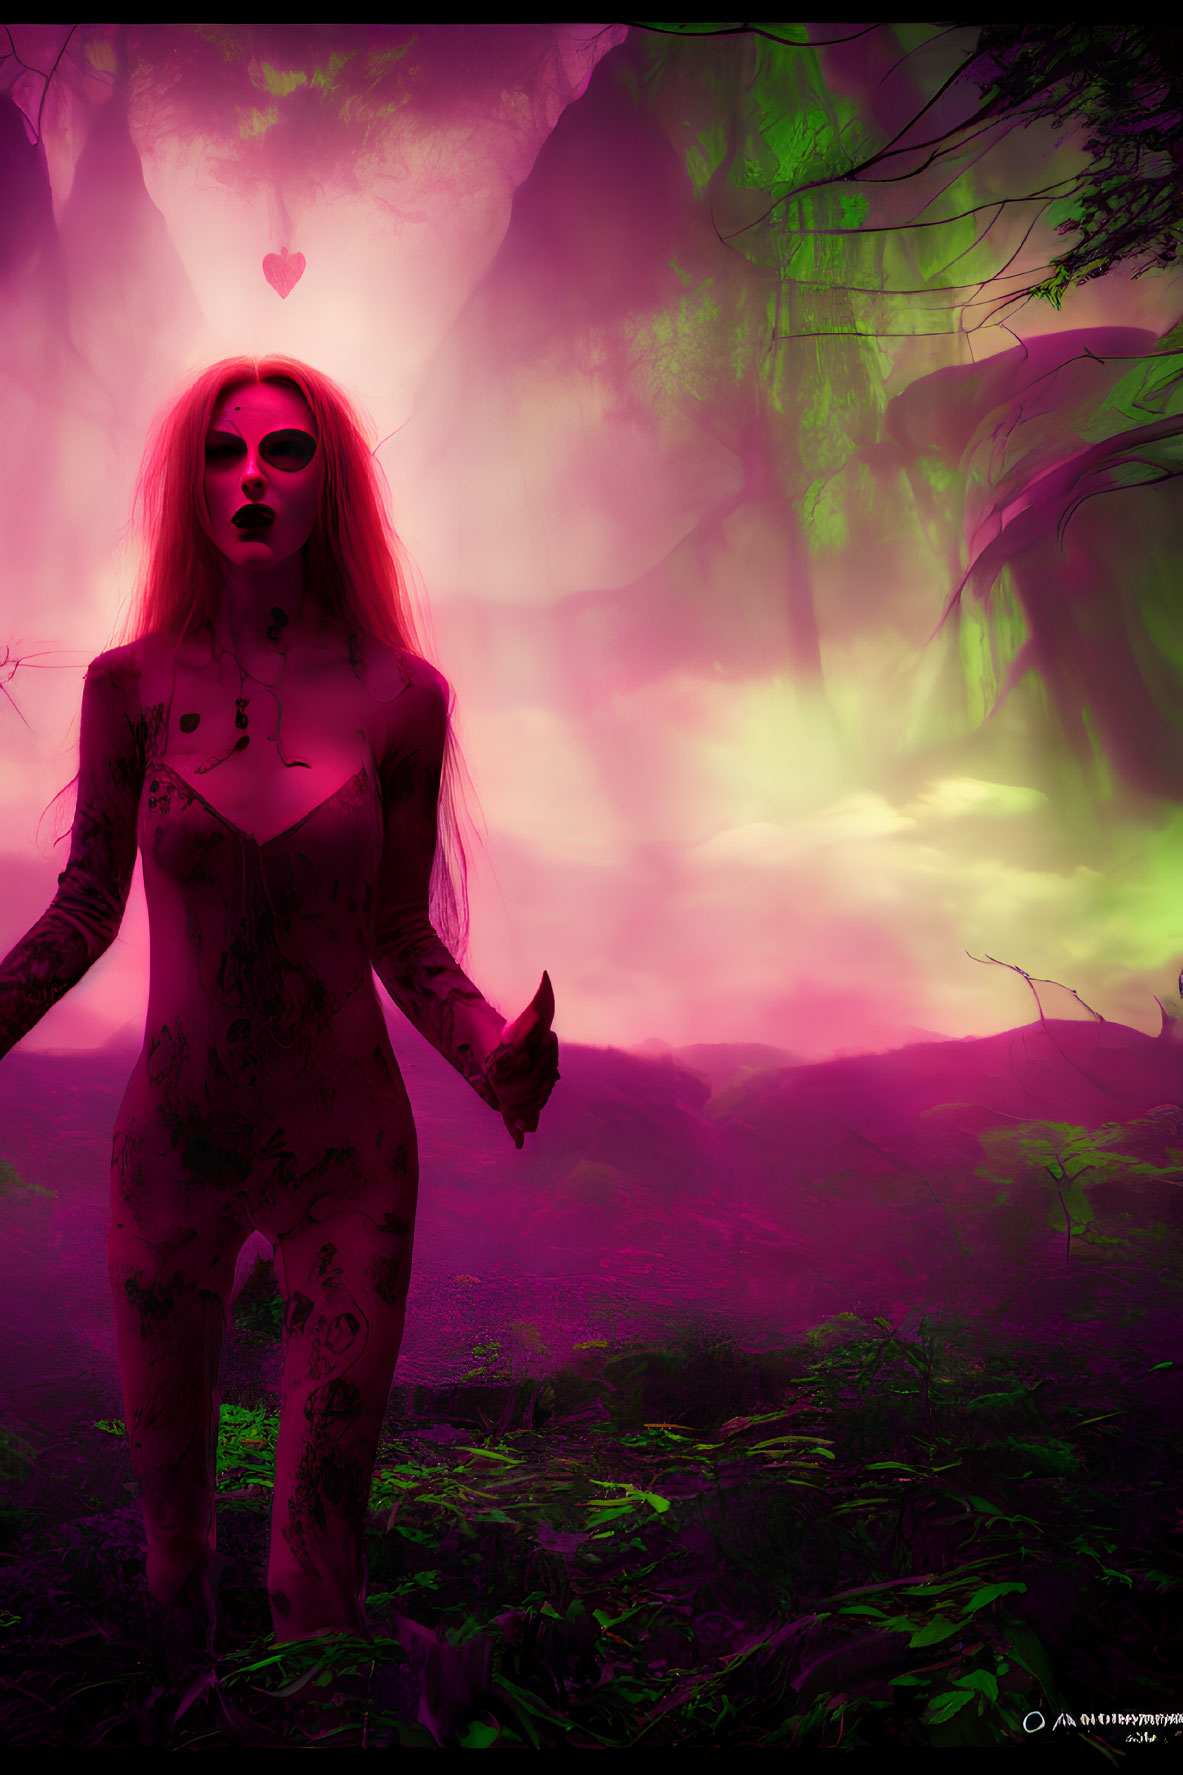 Blonde-haired tattooed woman in purple-lit fantasy forest with heart symbol